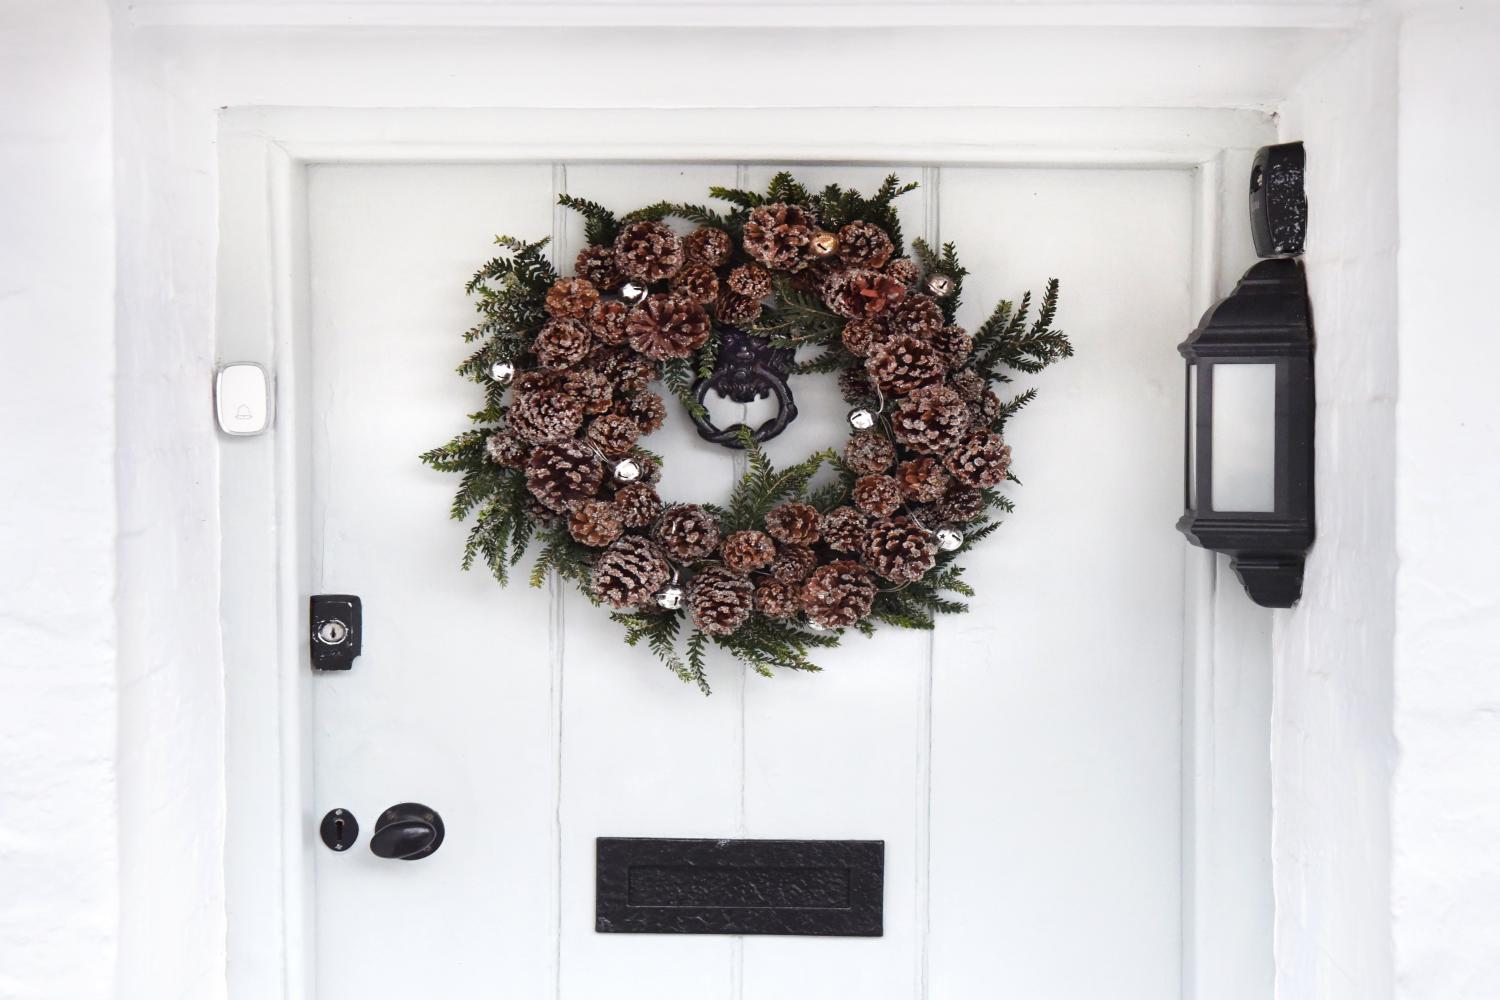 We love our wreaths!